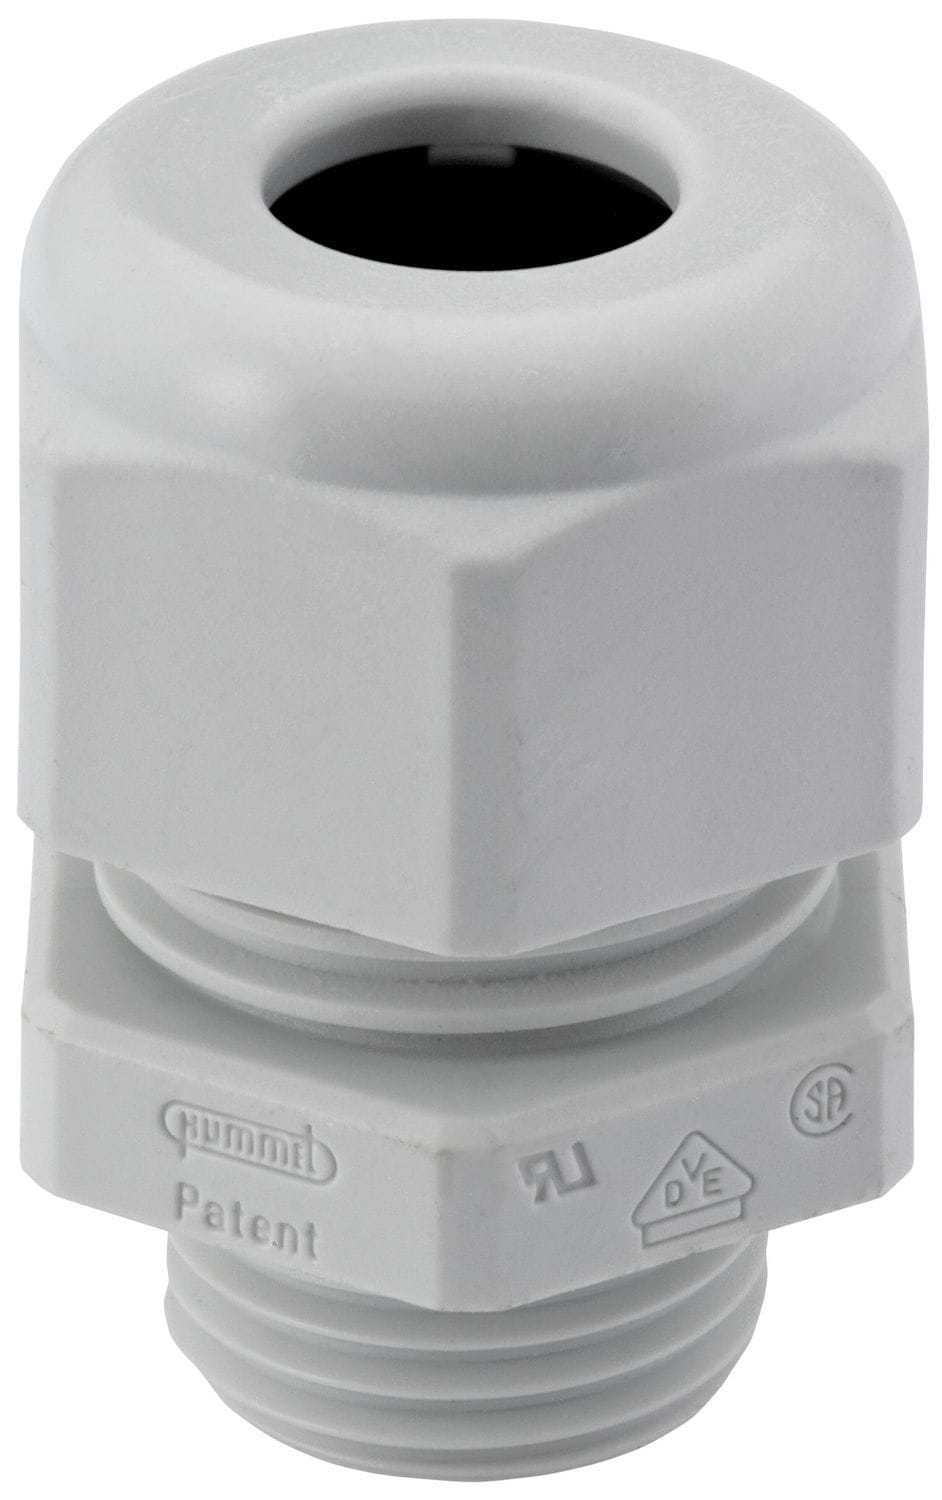 CABLE GLANDS HUMMEL, THREAD M20X1.5 LIGHT GREY RAL 7035 WITH LOCKNUT INCLUDED - Image 1